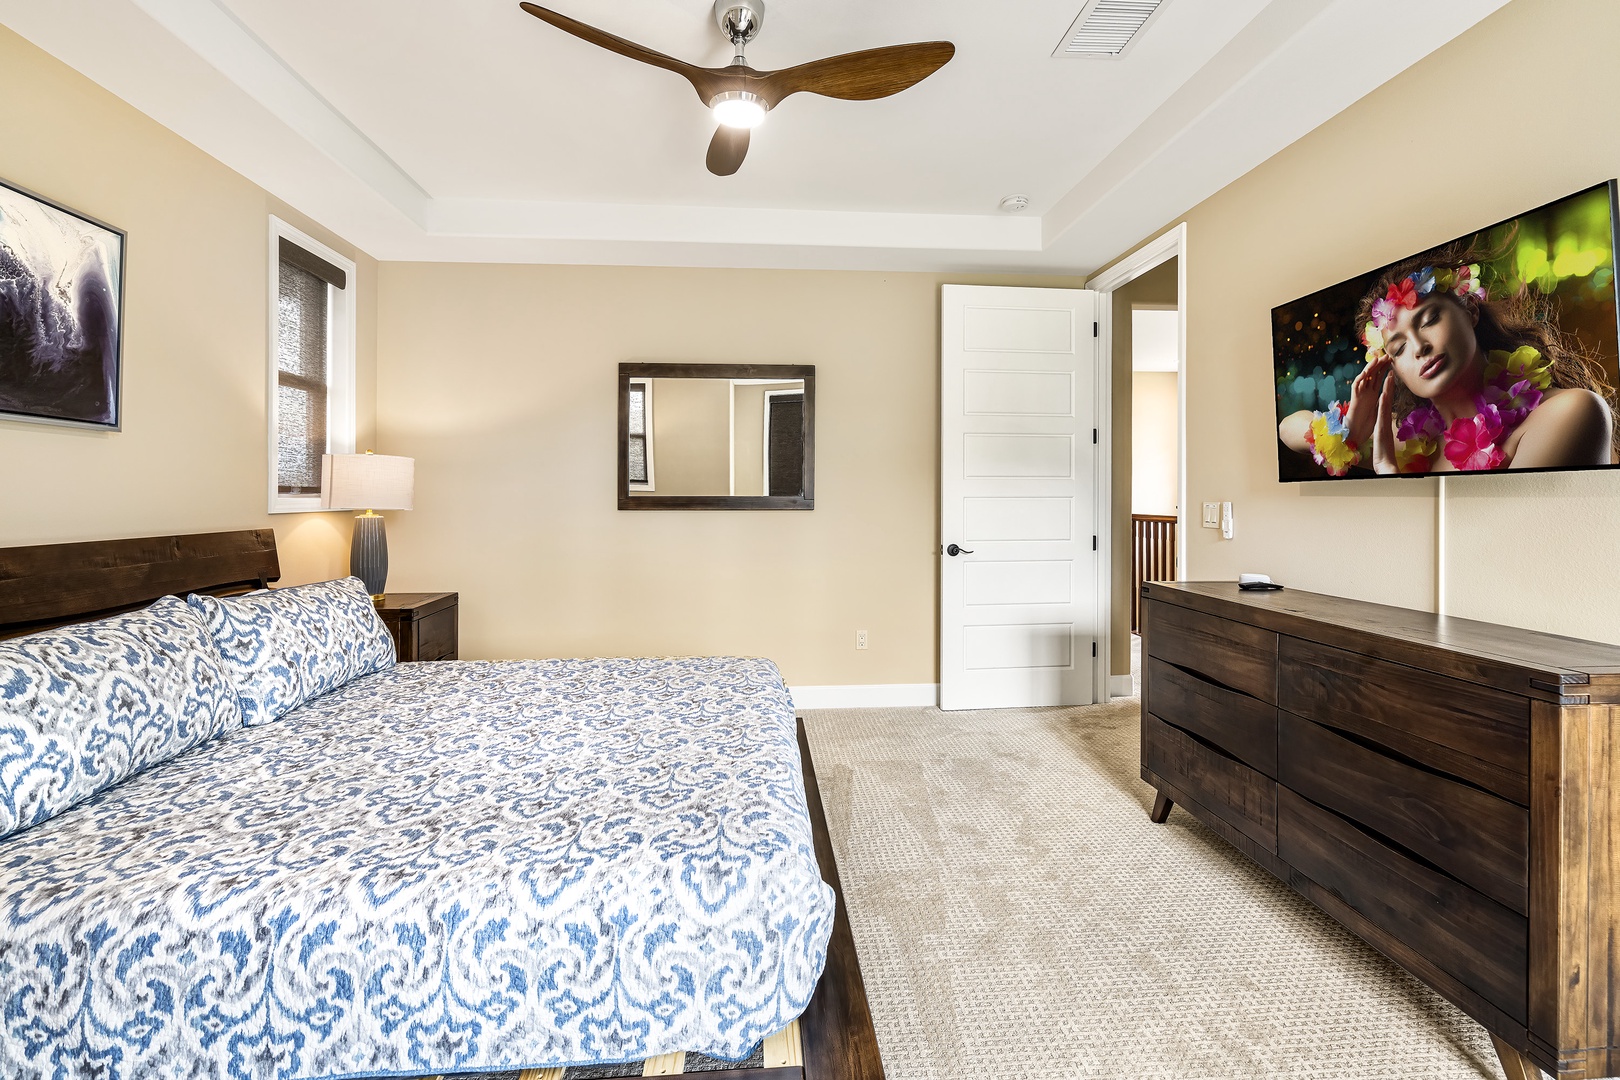 Kailua Kona Vacation Rentals, Holua Kai #9 - Eastern King bed, TV, A?C, Ocean views, ensuite, walk in  closet, soaking tub and private Lanai are just some of the wonderful features found in the primary bedroom!